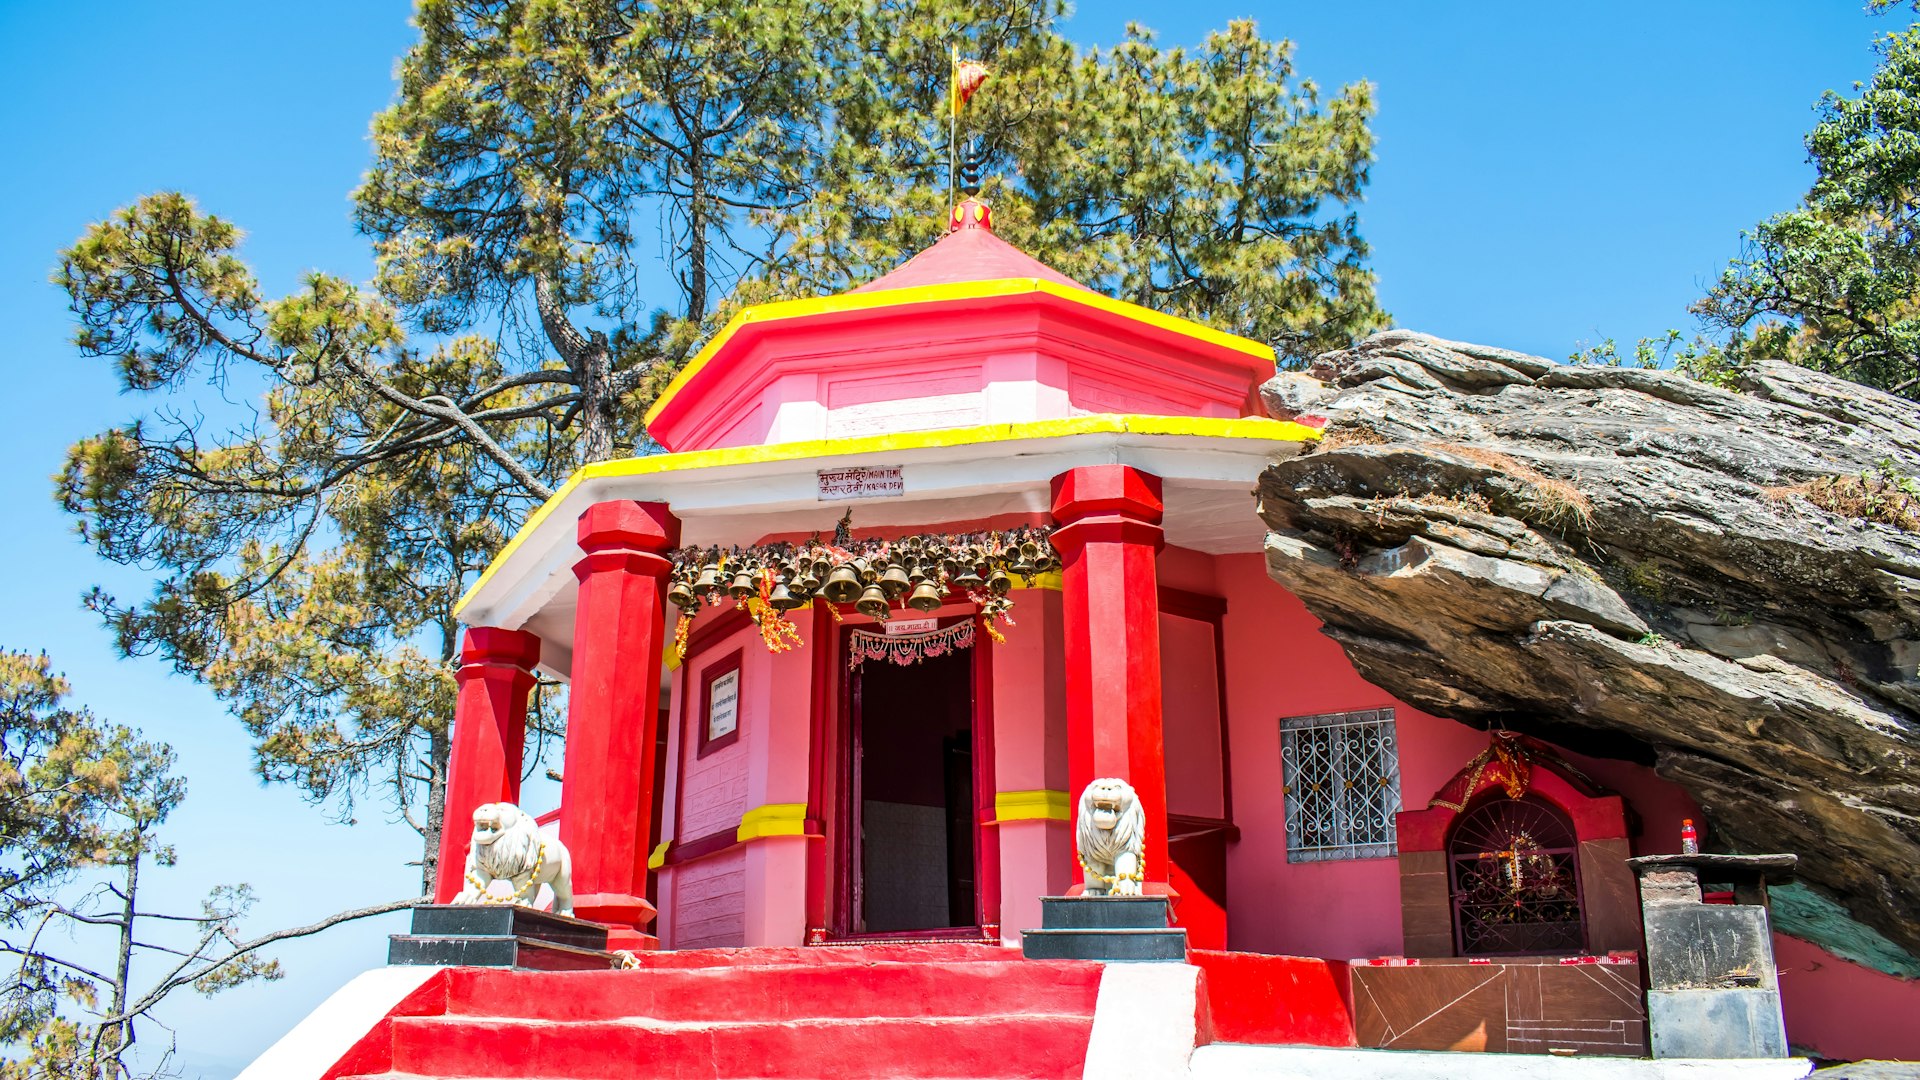 The famous Kasar Devi Temple, a pink-colored Hindu shrine